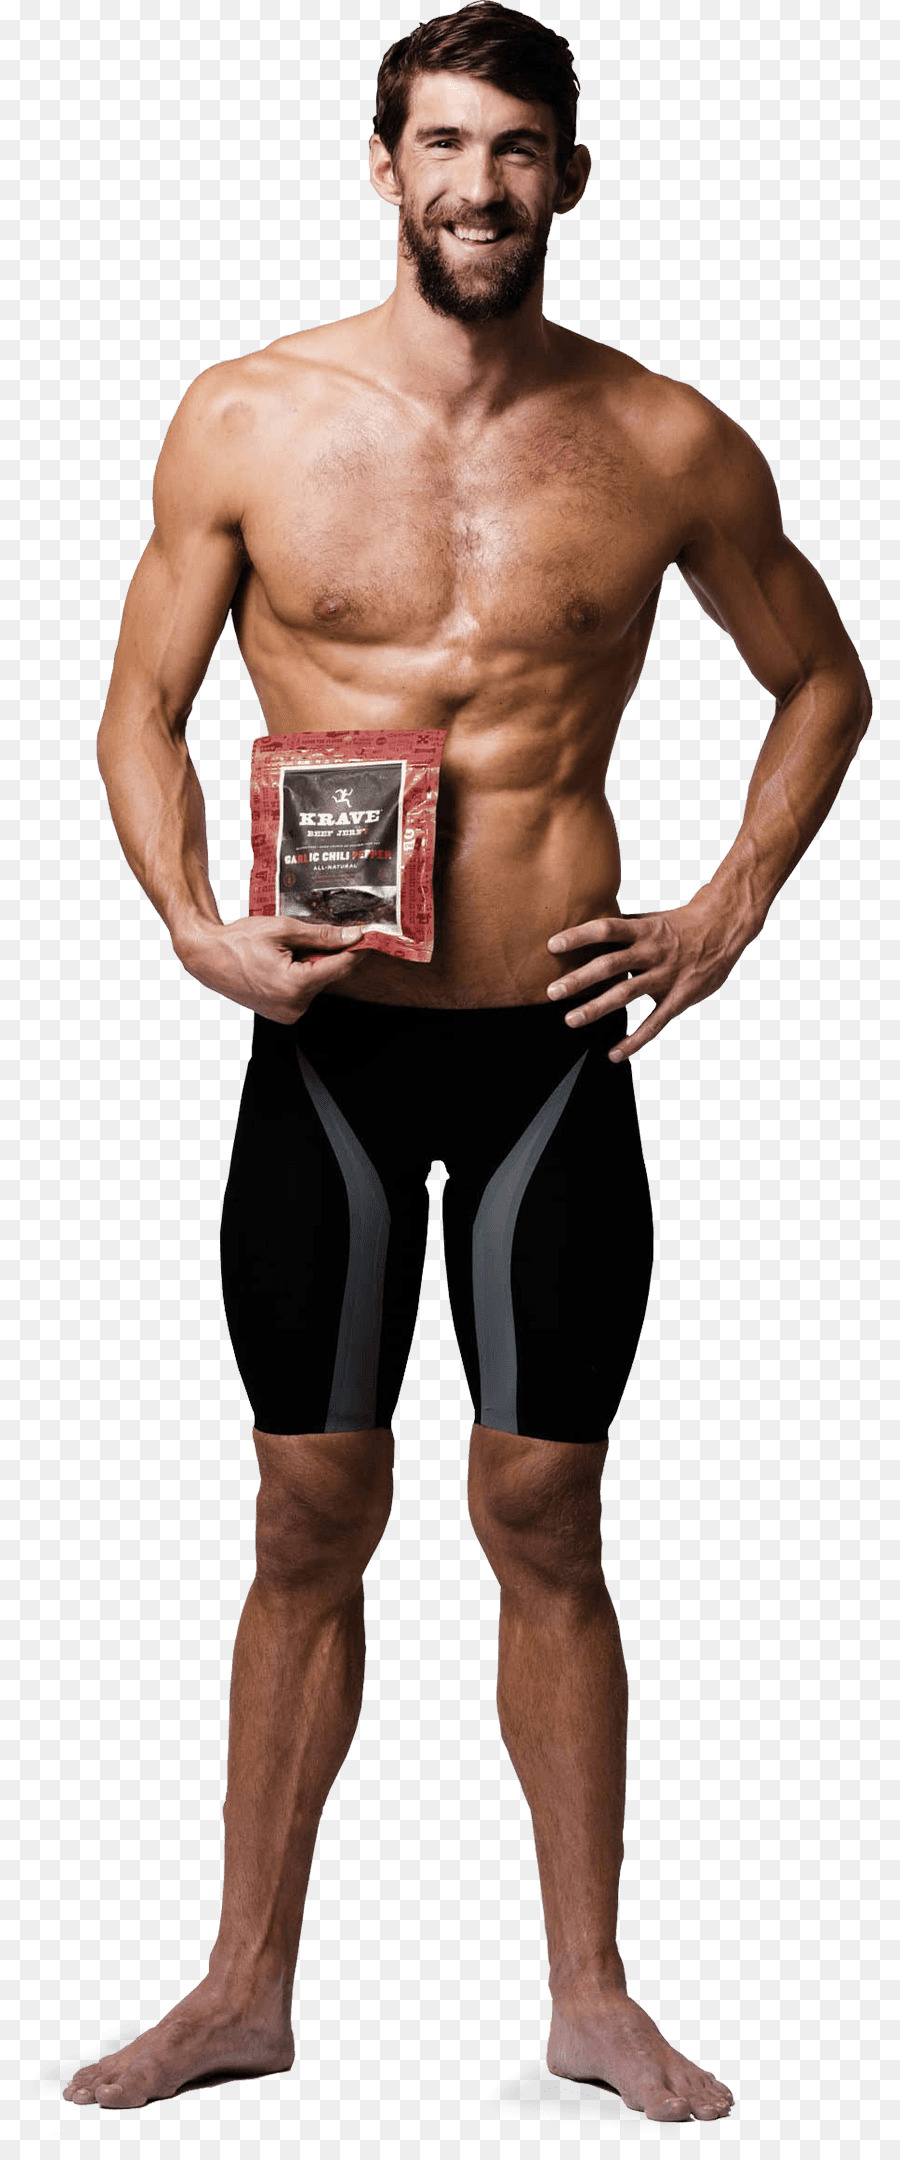 Michael Phelps Athlete Male Krave Jerky Physical fitness - Mike png